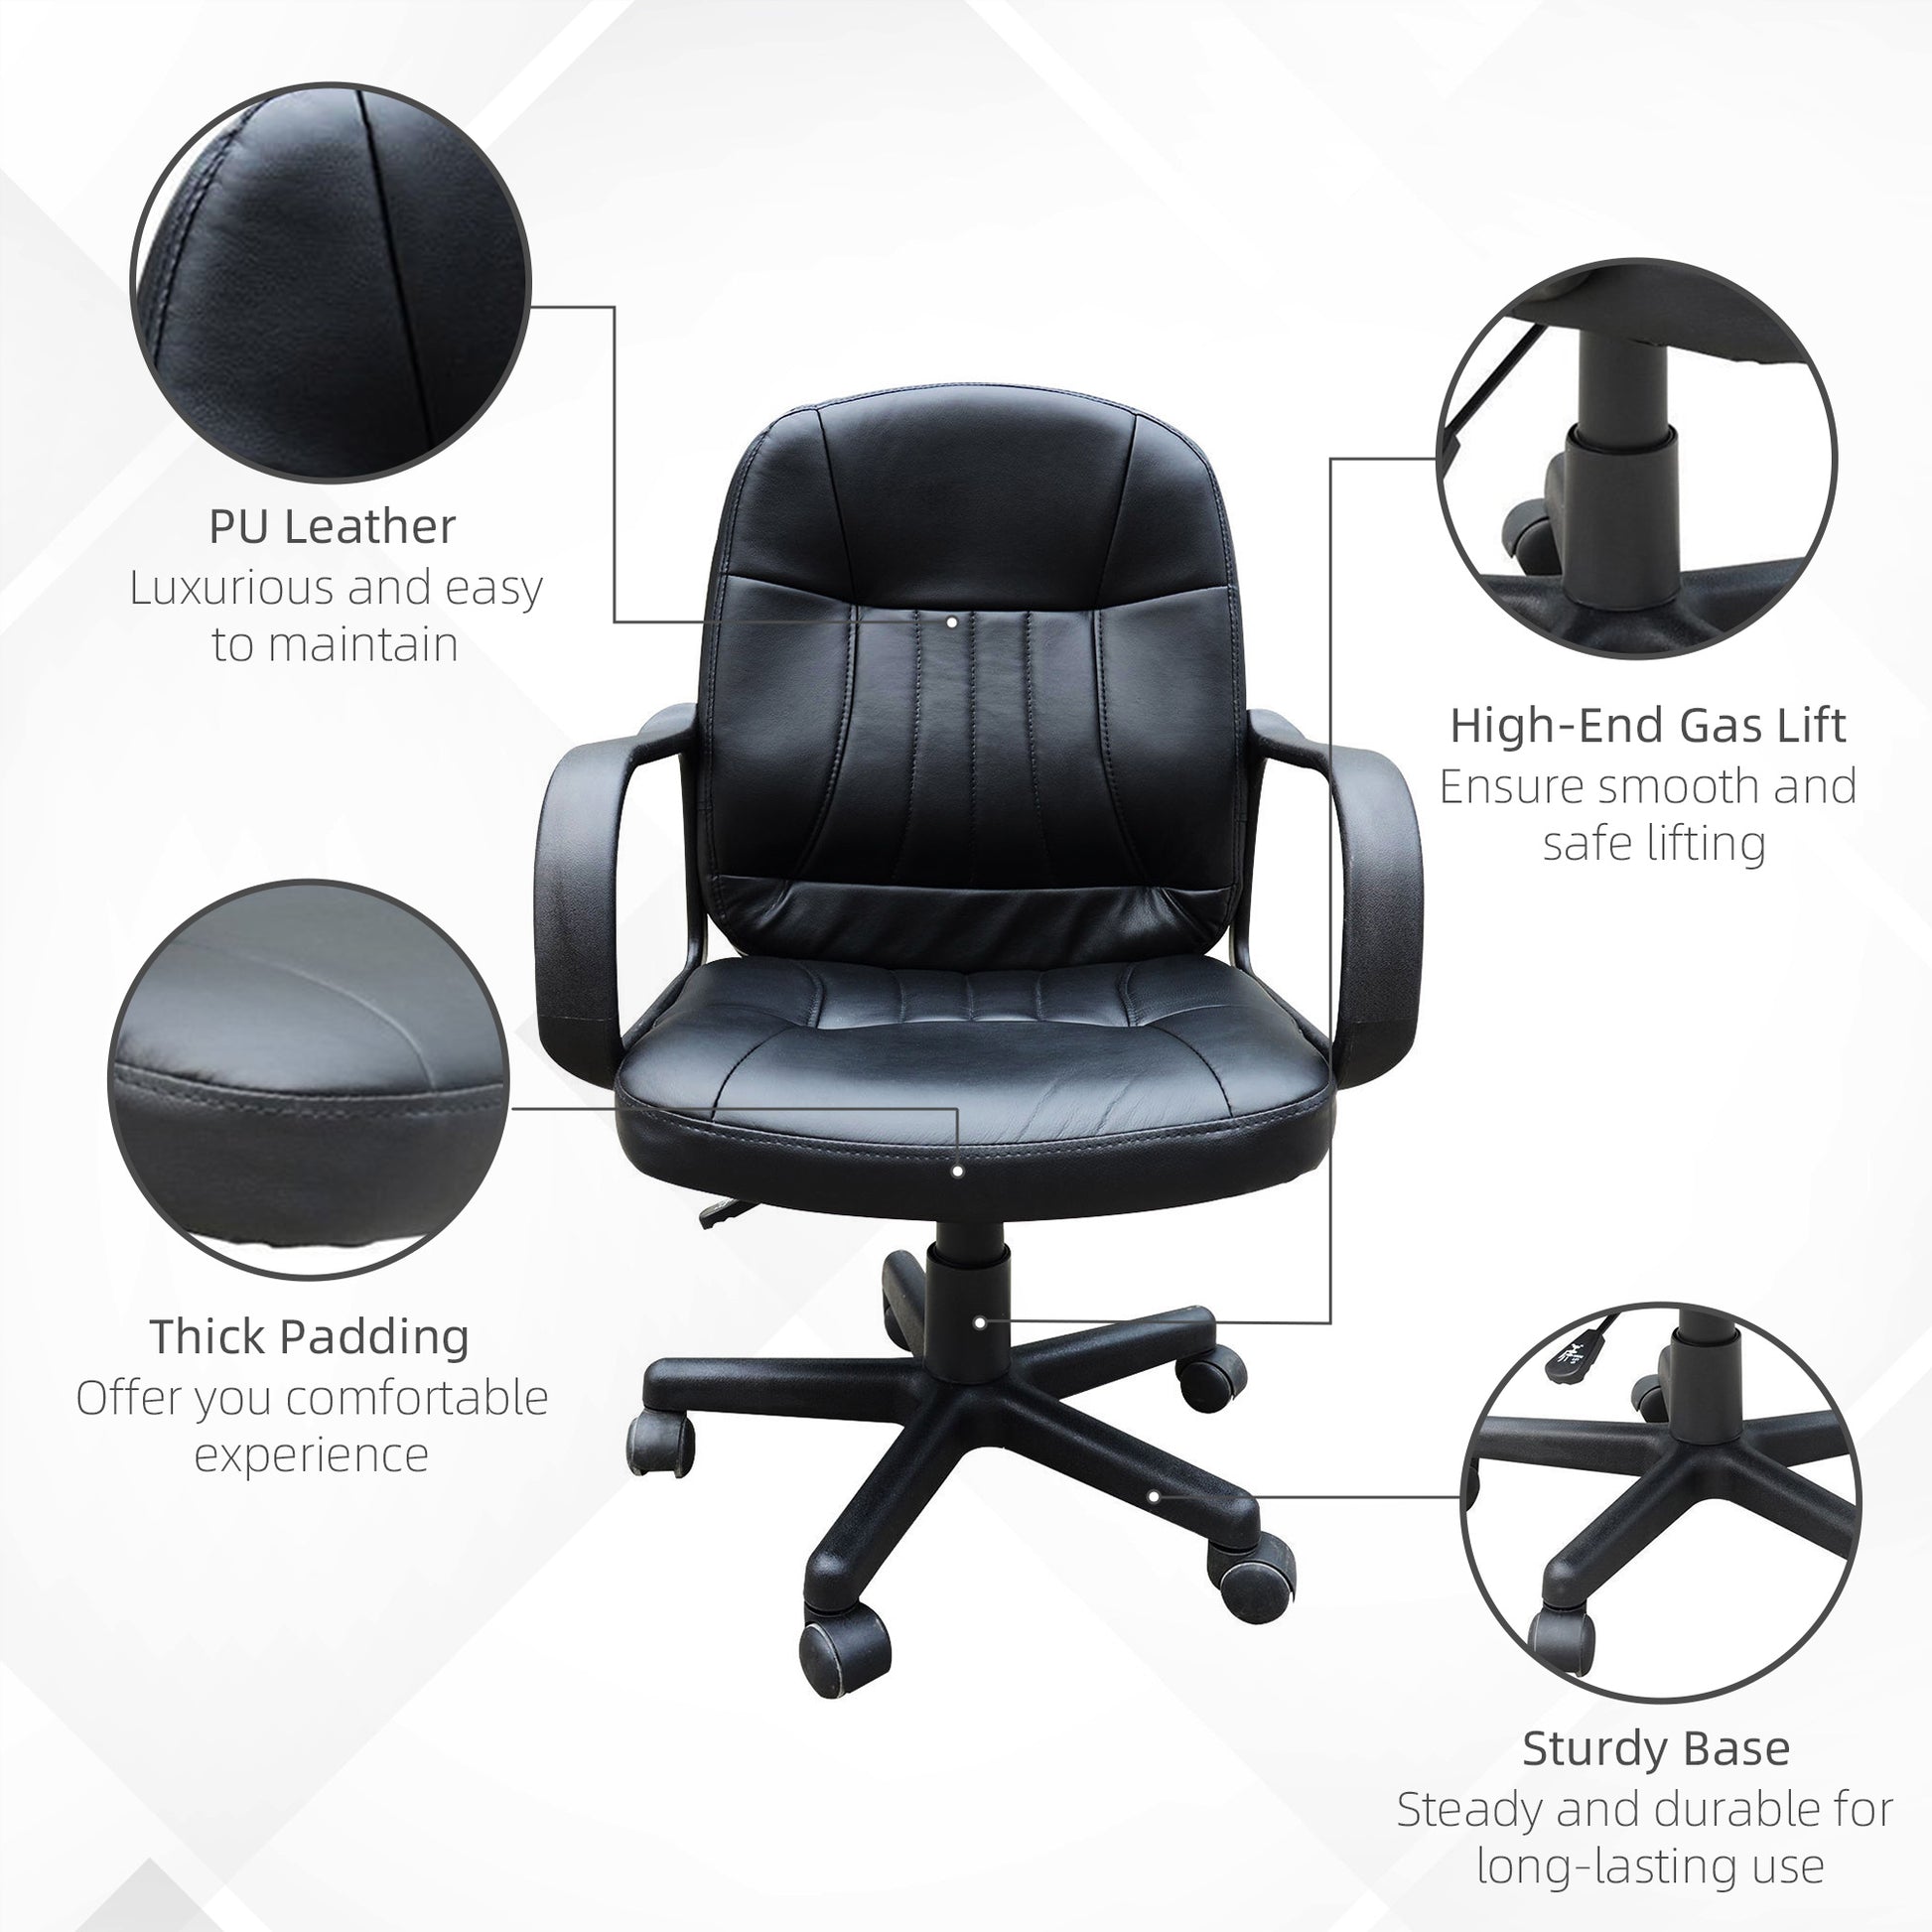 Swivel Executive Office Chair, PU Leather Desk Chair, Computer Chair, Gaming Seater, Black, HOMCOM, 6